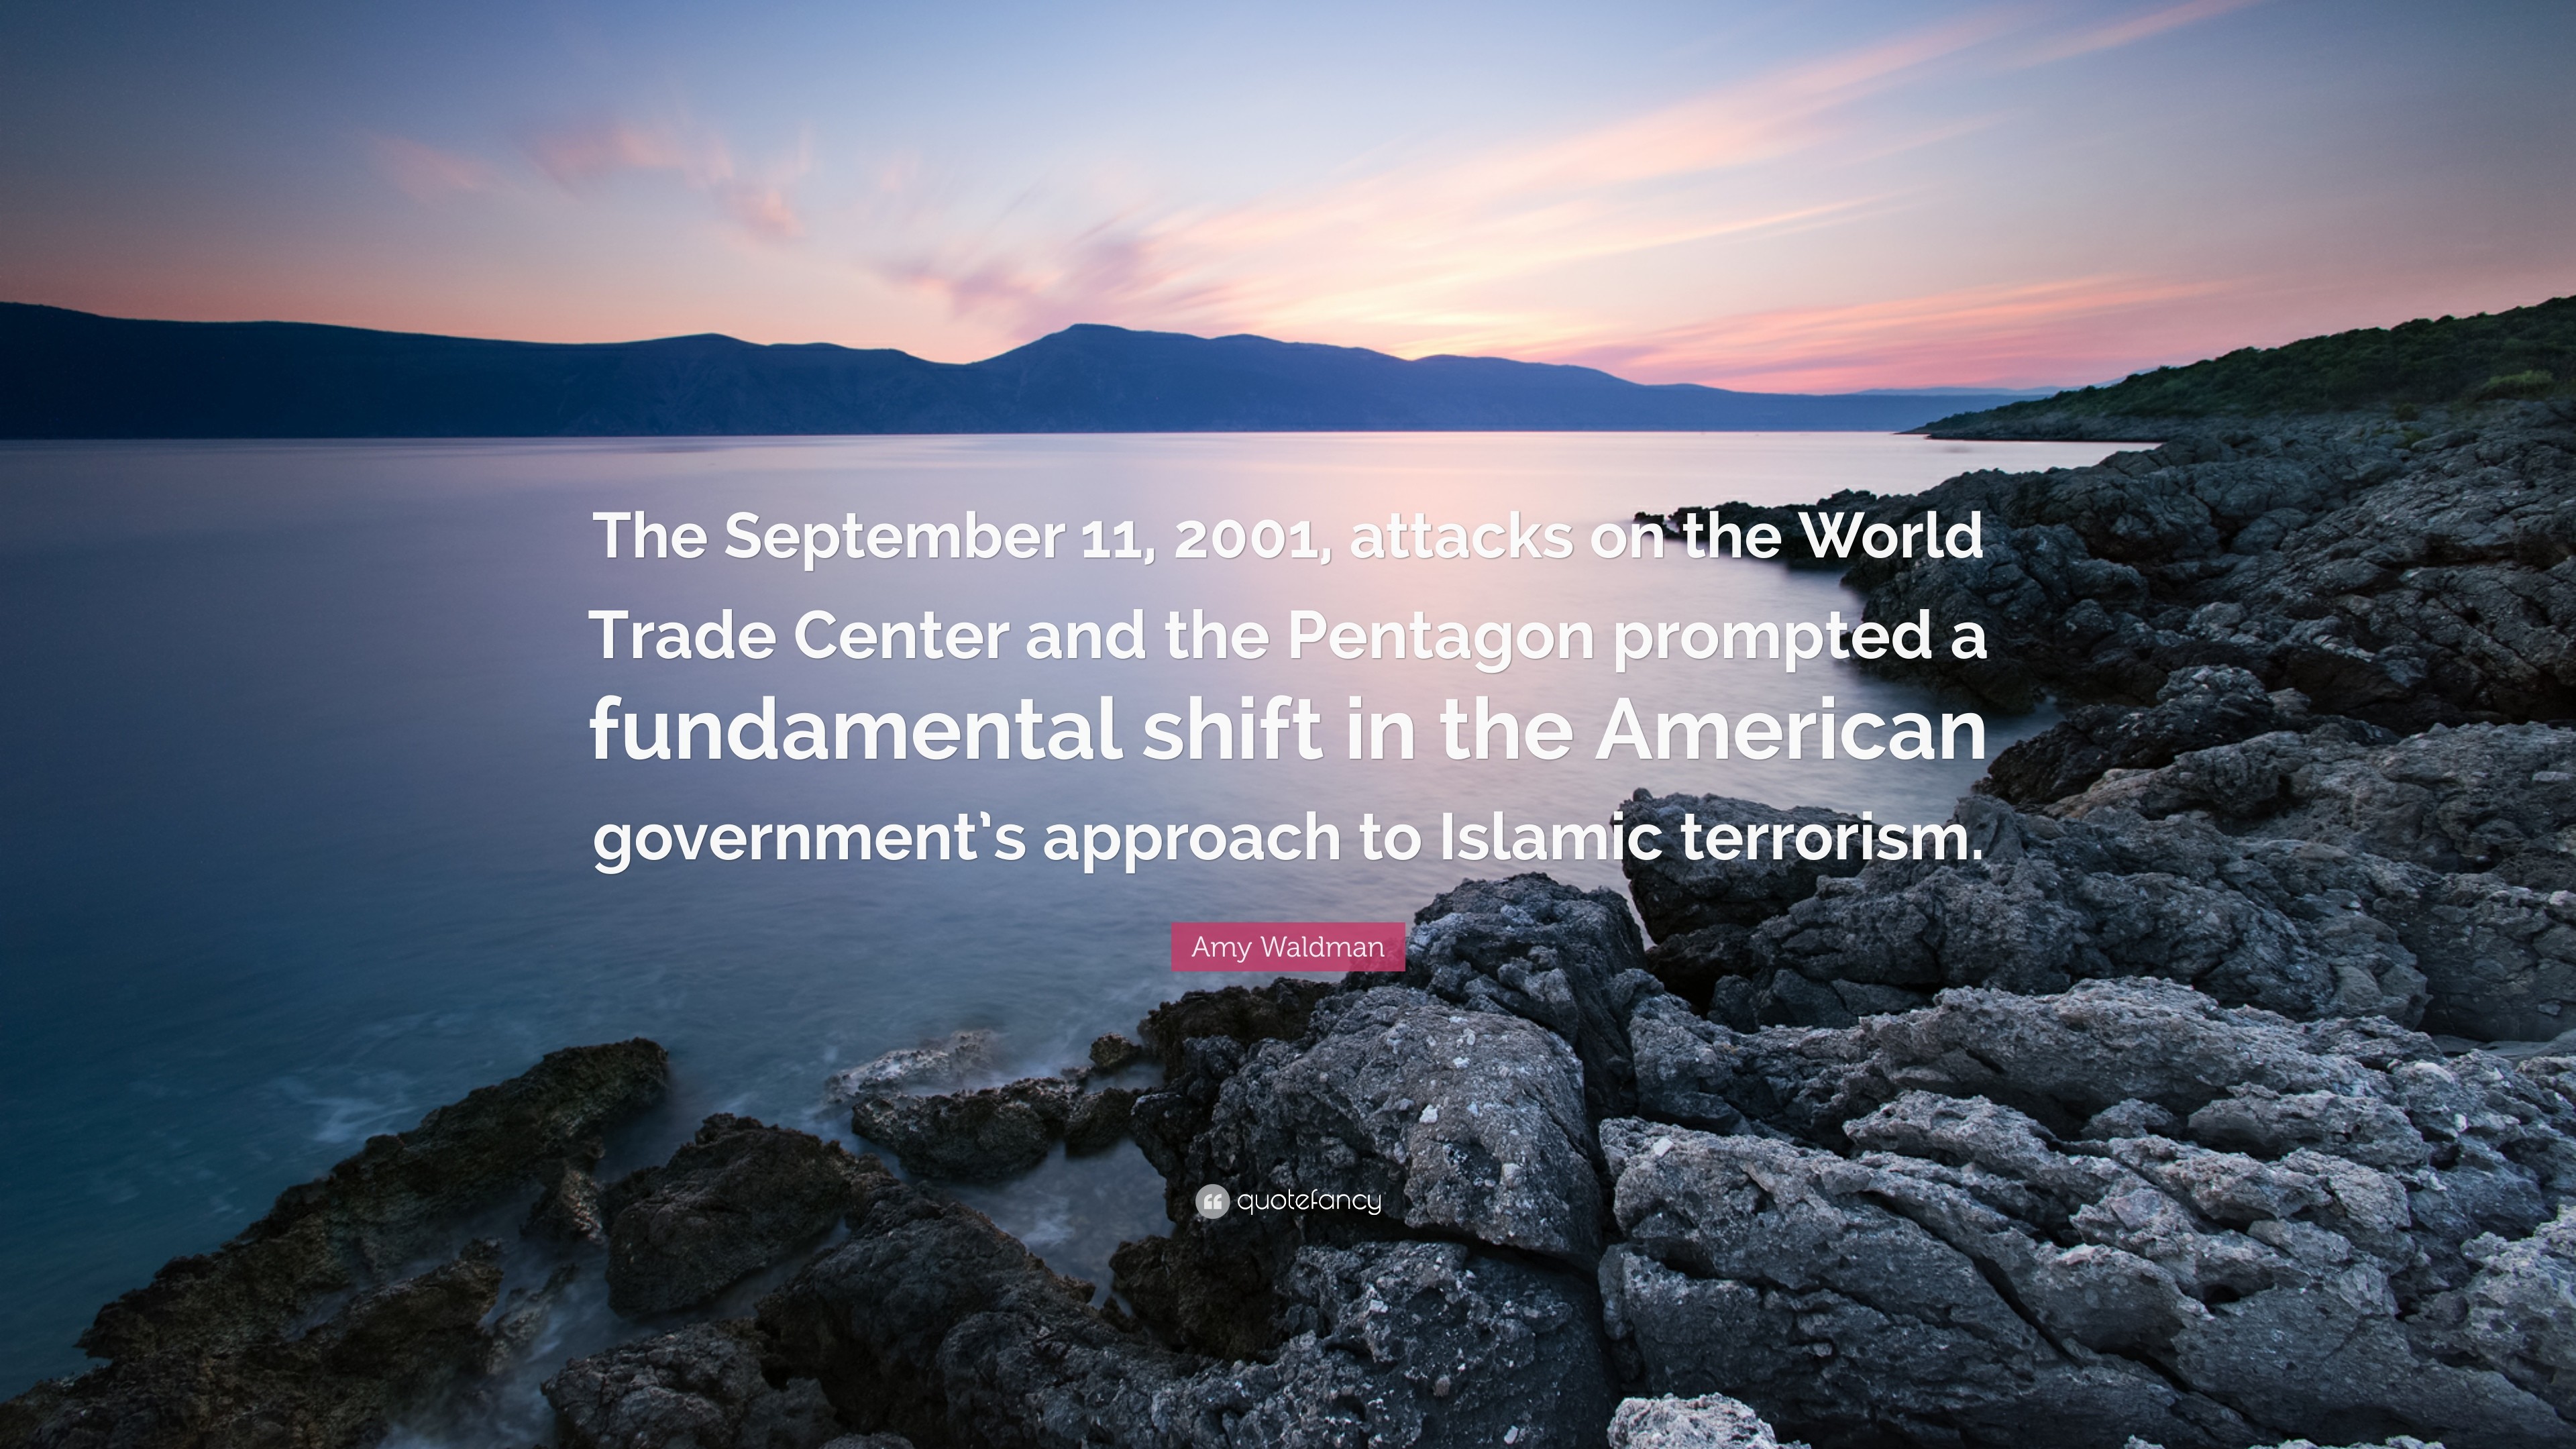 3840x2160 Amy Waldman Quote: “The September 11, 2001, attacks on the World Trade